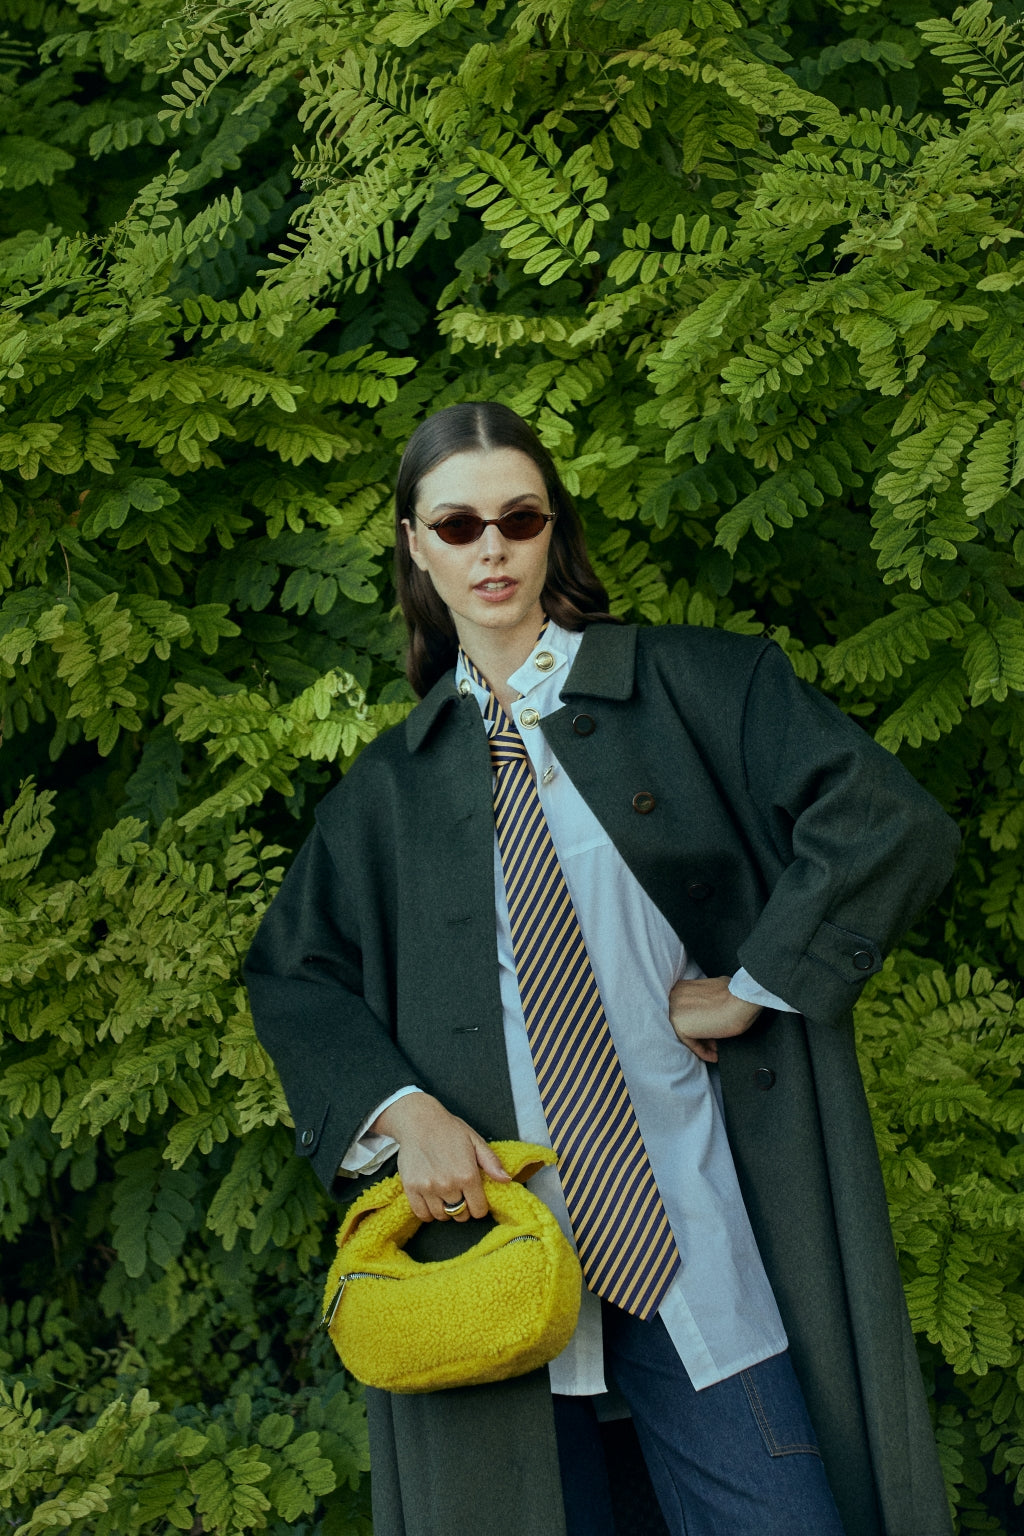 Fashionable person wearing a dark coat and sunglasses, holding a yellow handbag in front of lush green foliage